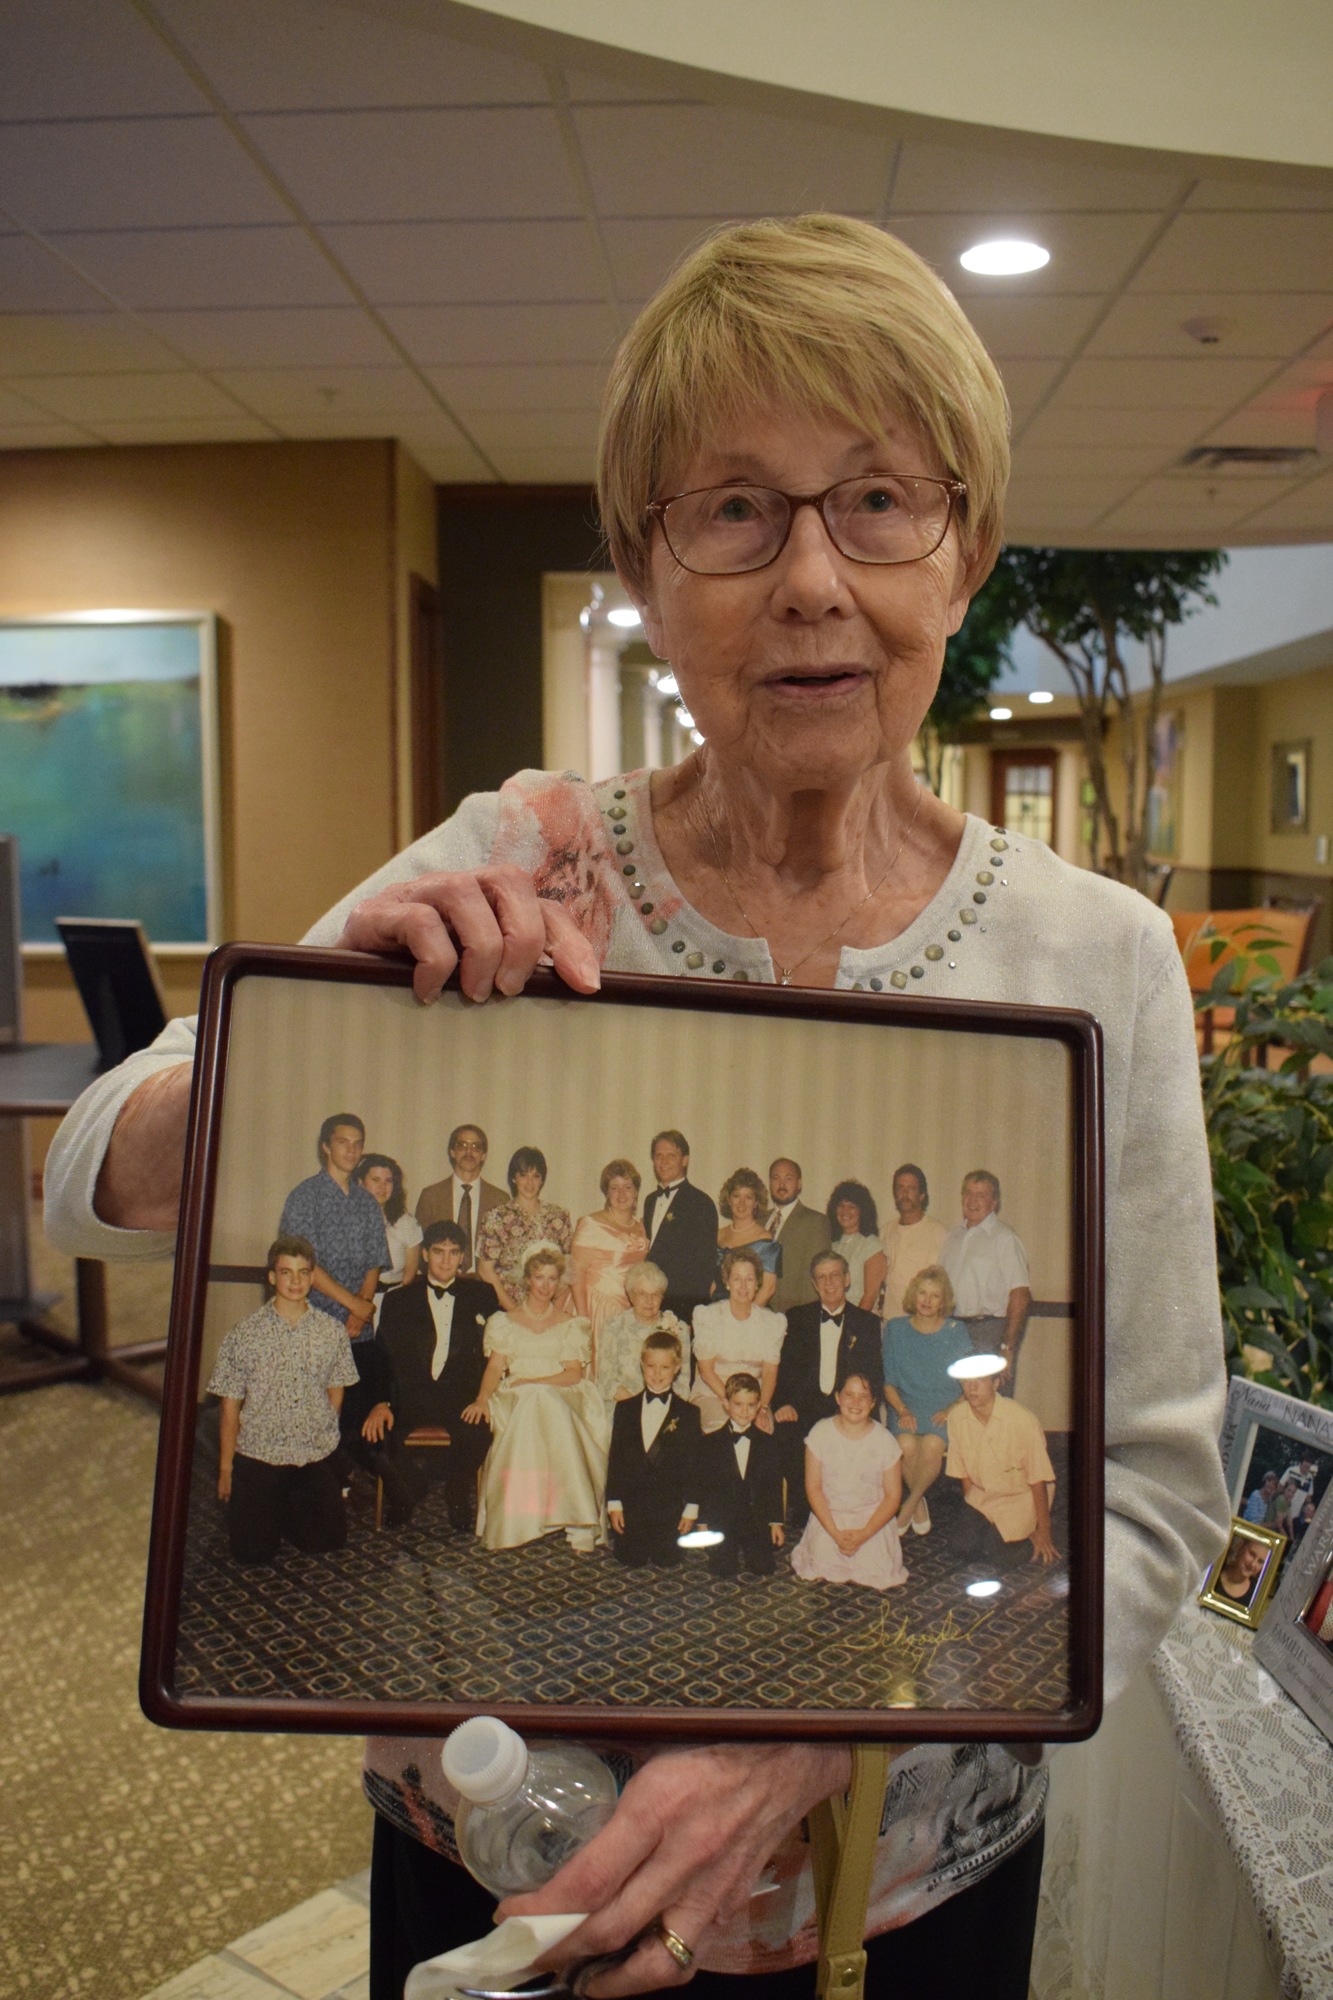 Joanne Warmar, a resident at Stone River Retirement Community, shows a photo of her family. She has Five children, nine grandchildren, 10 great-grandchildren and two great-great grandchildren.